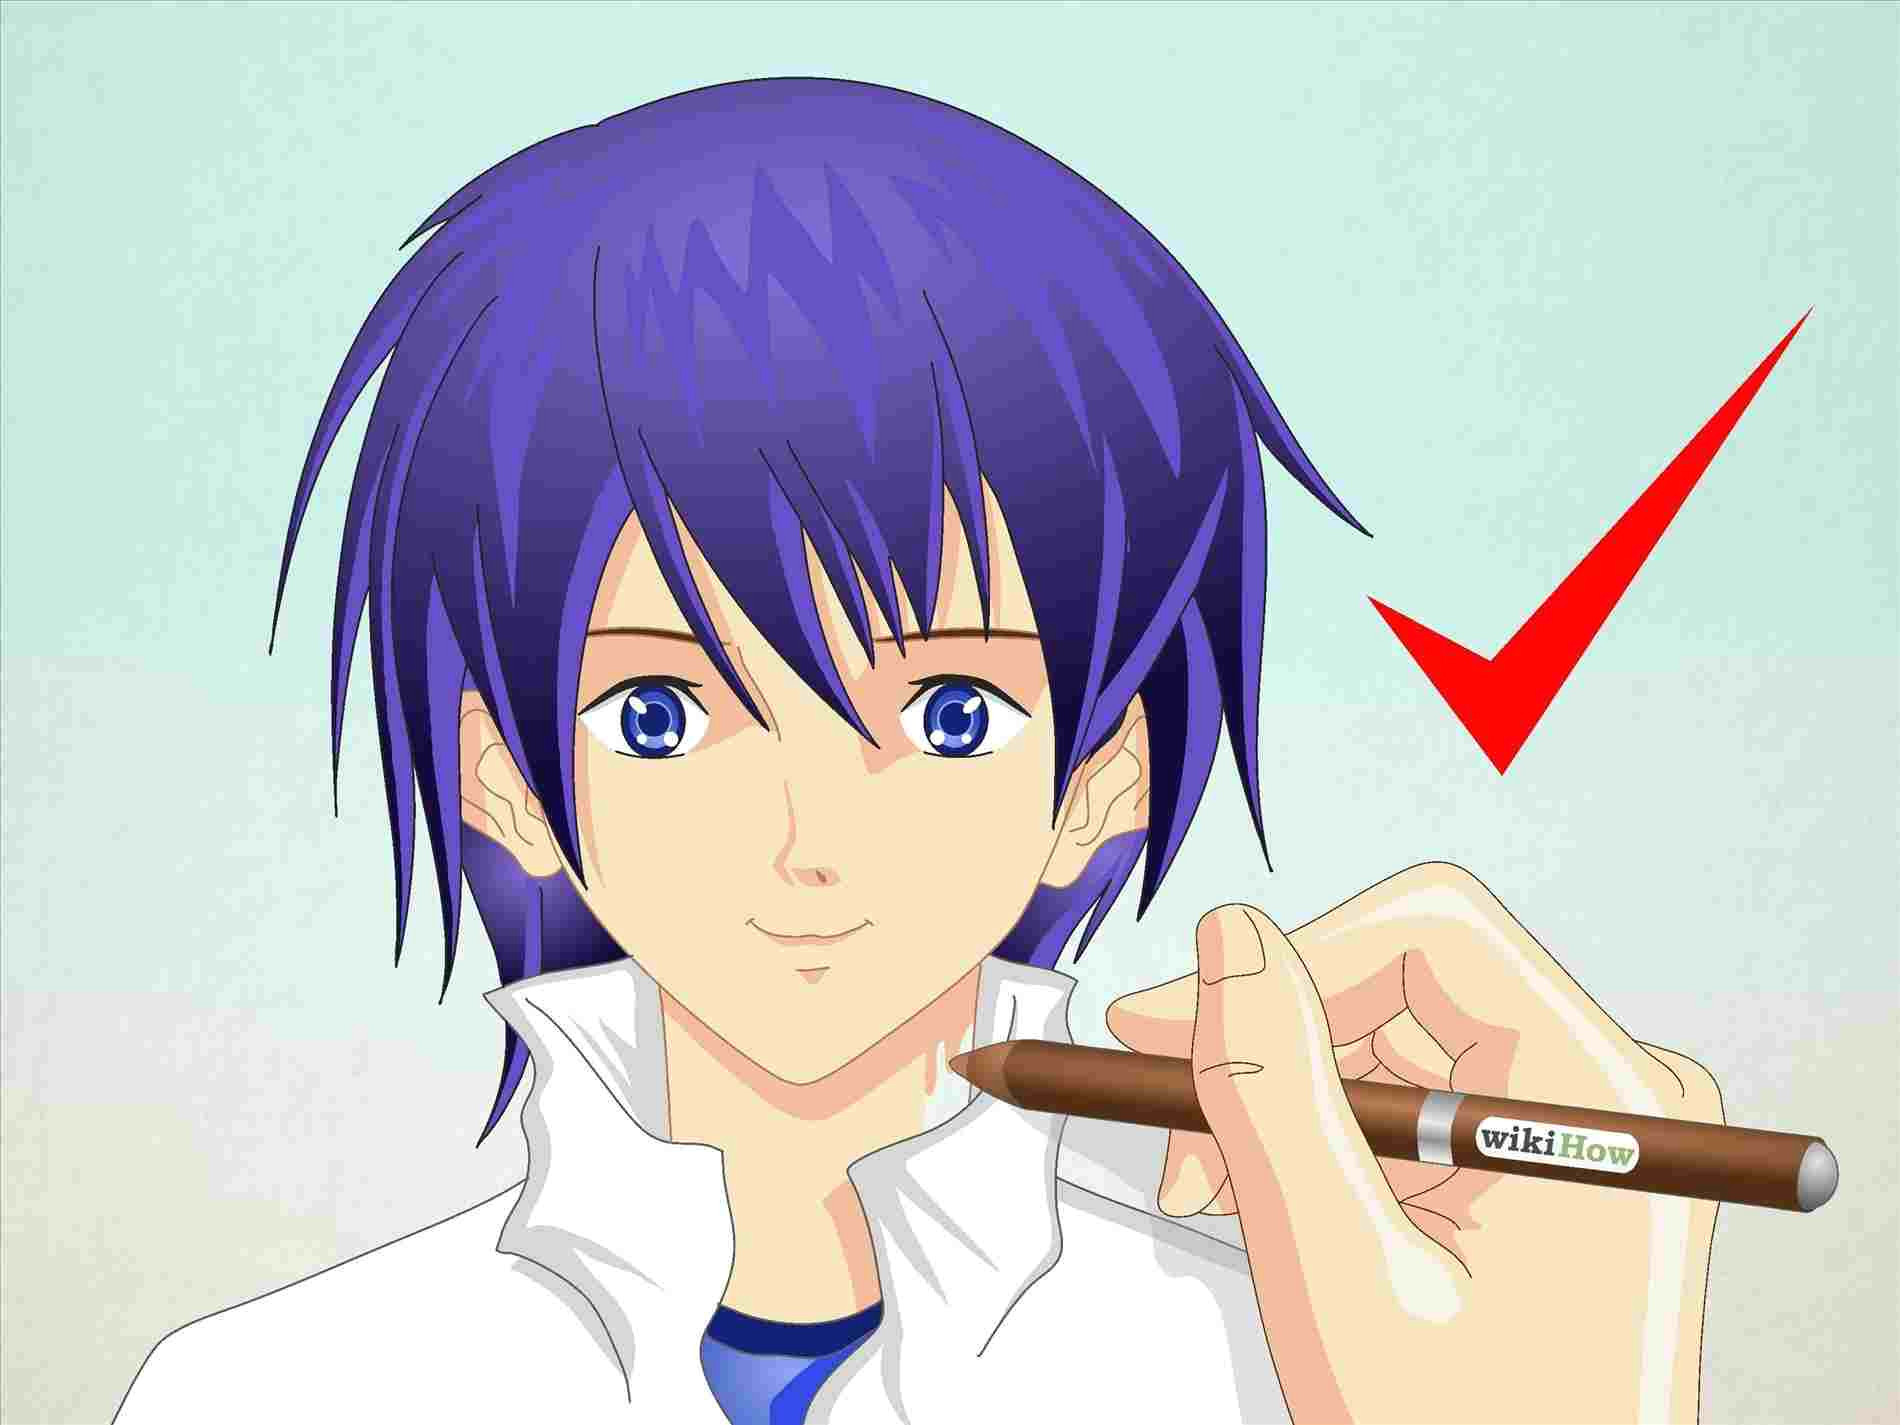 drawing od cute male anime men to draw a chibi boy with pictures wikihowrhwikihowcom manga boys at getscom free for personal use rhgetscom manga drawing od jpg